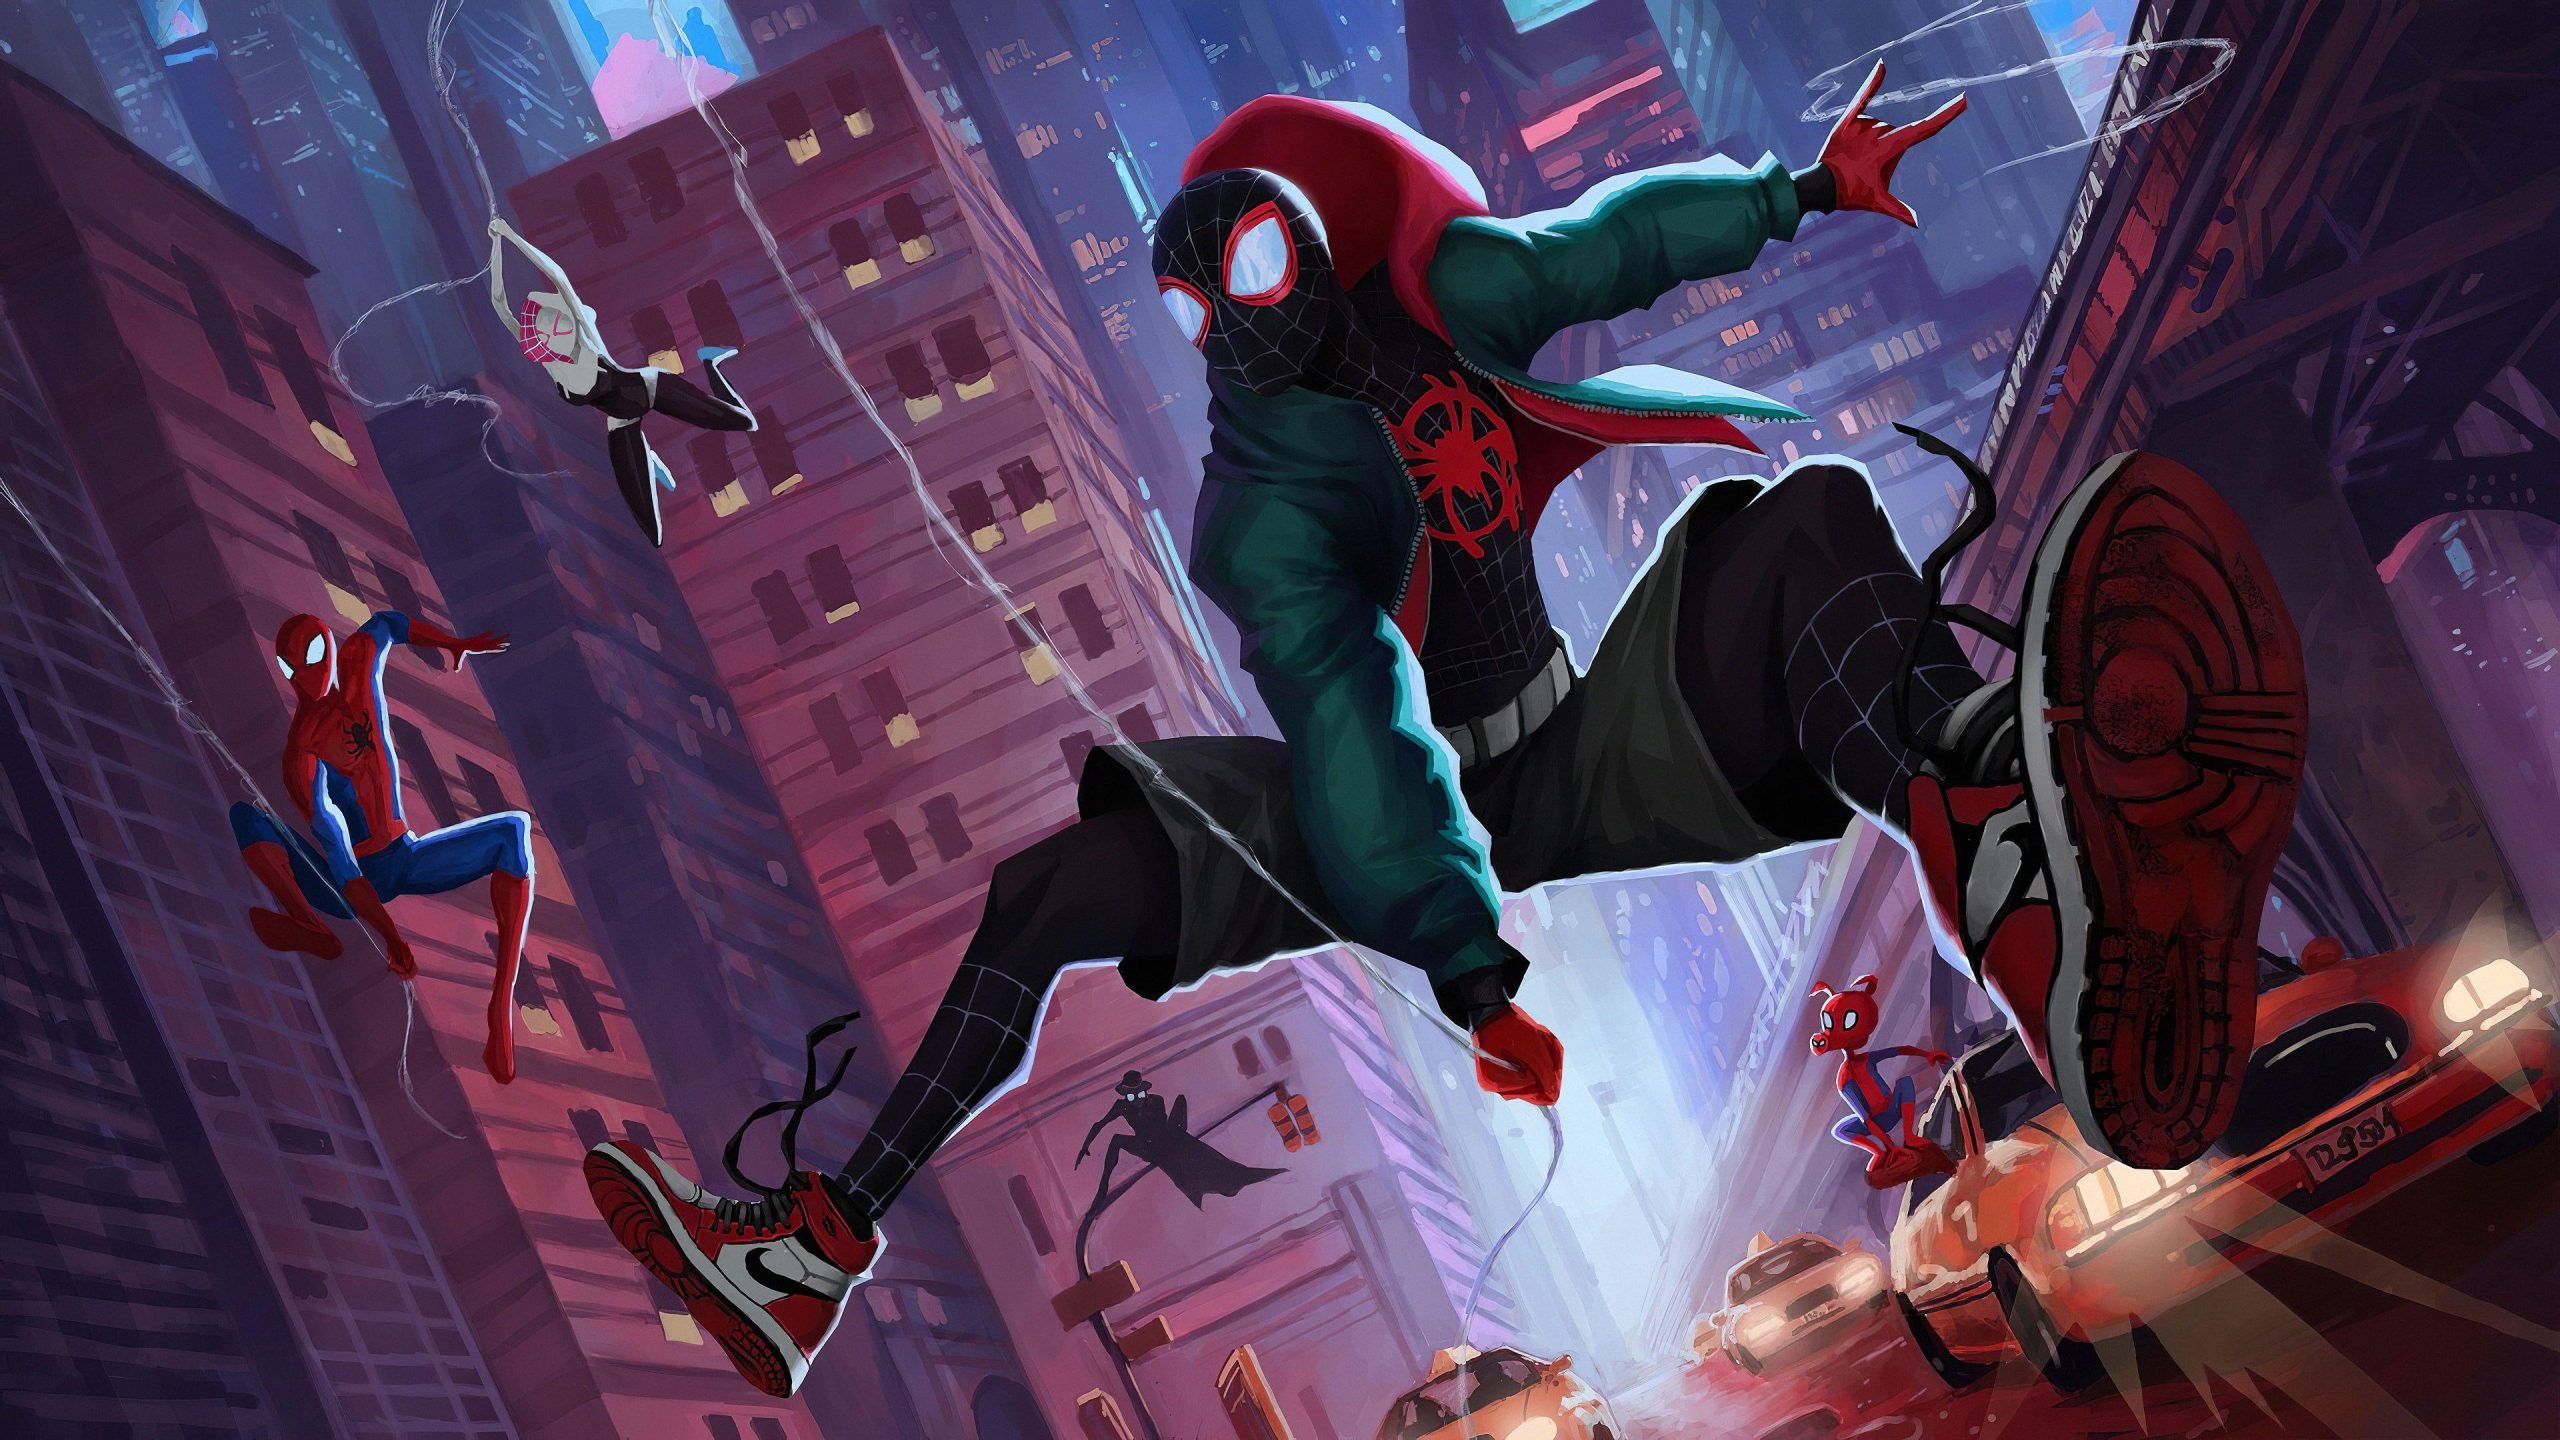 Miles Morales And Gwen Stacy Wallpaper 4k For Laptop, Miles Morales And Gwen Stacy, Movies